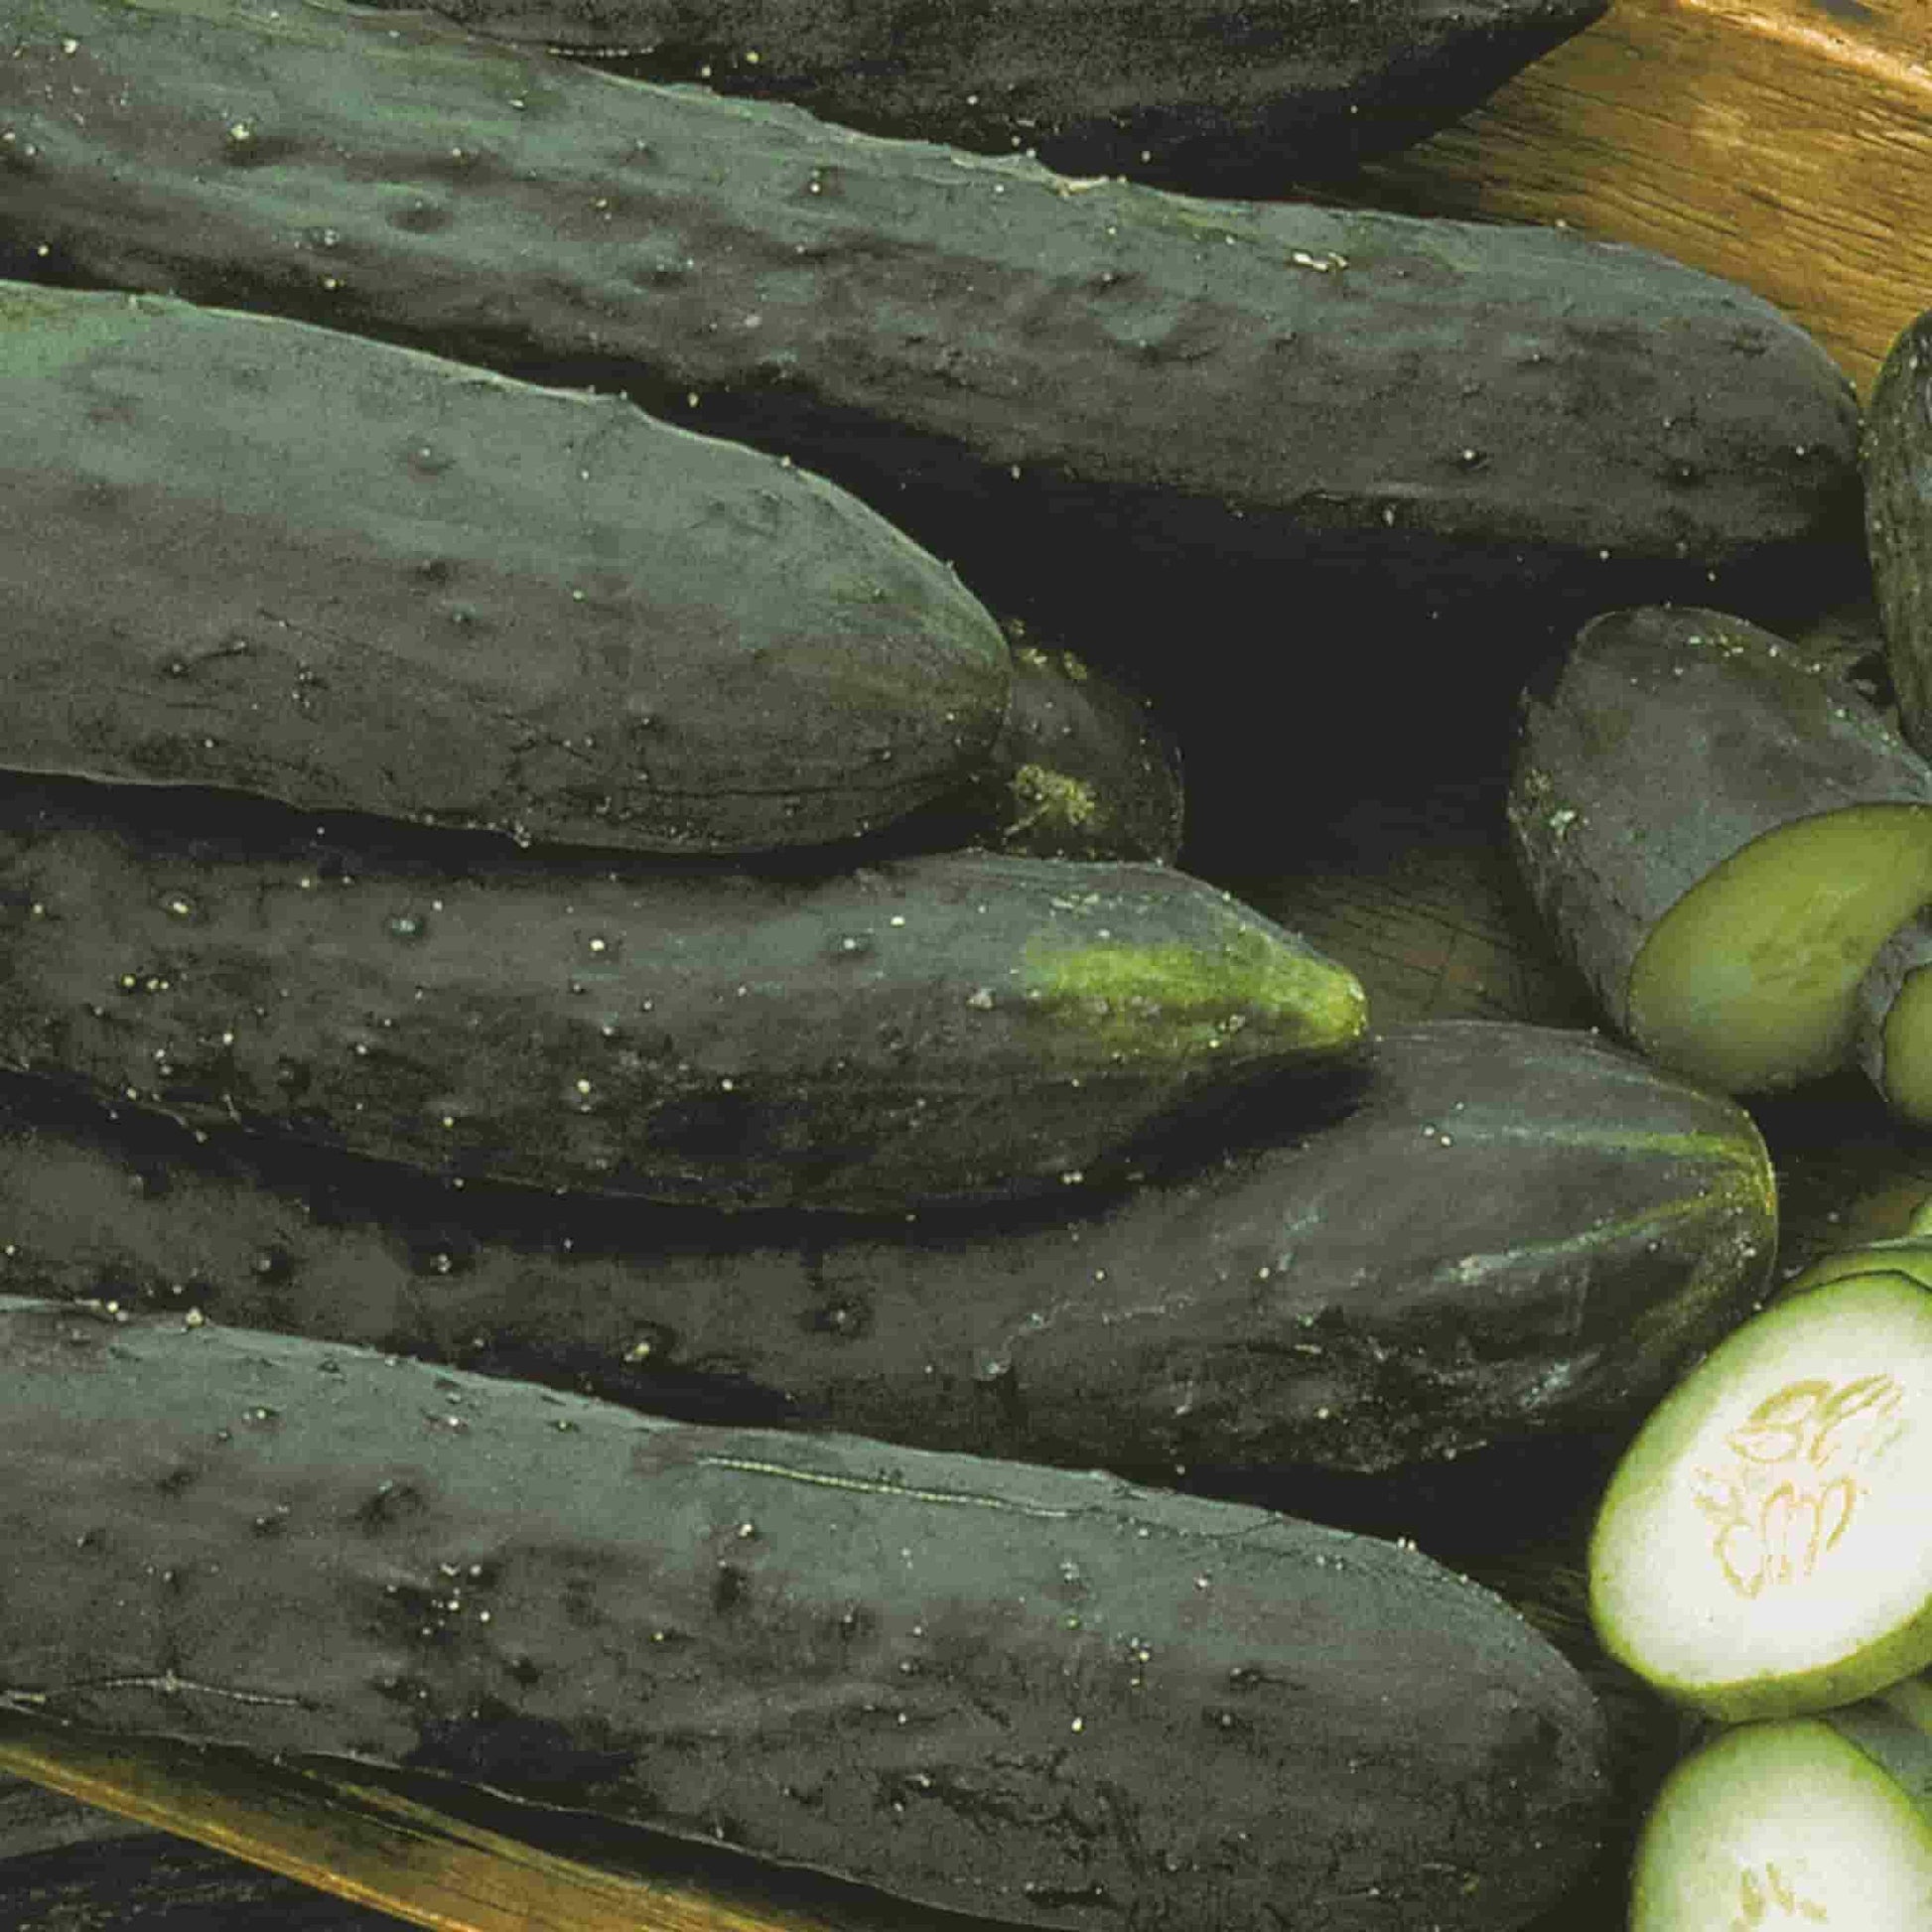 Tendergreen Burpless Cucumbers from Ferry Morse, fully grown matured and freshly harvested.